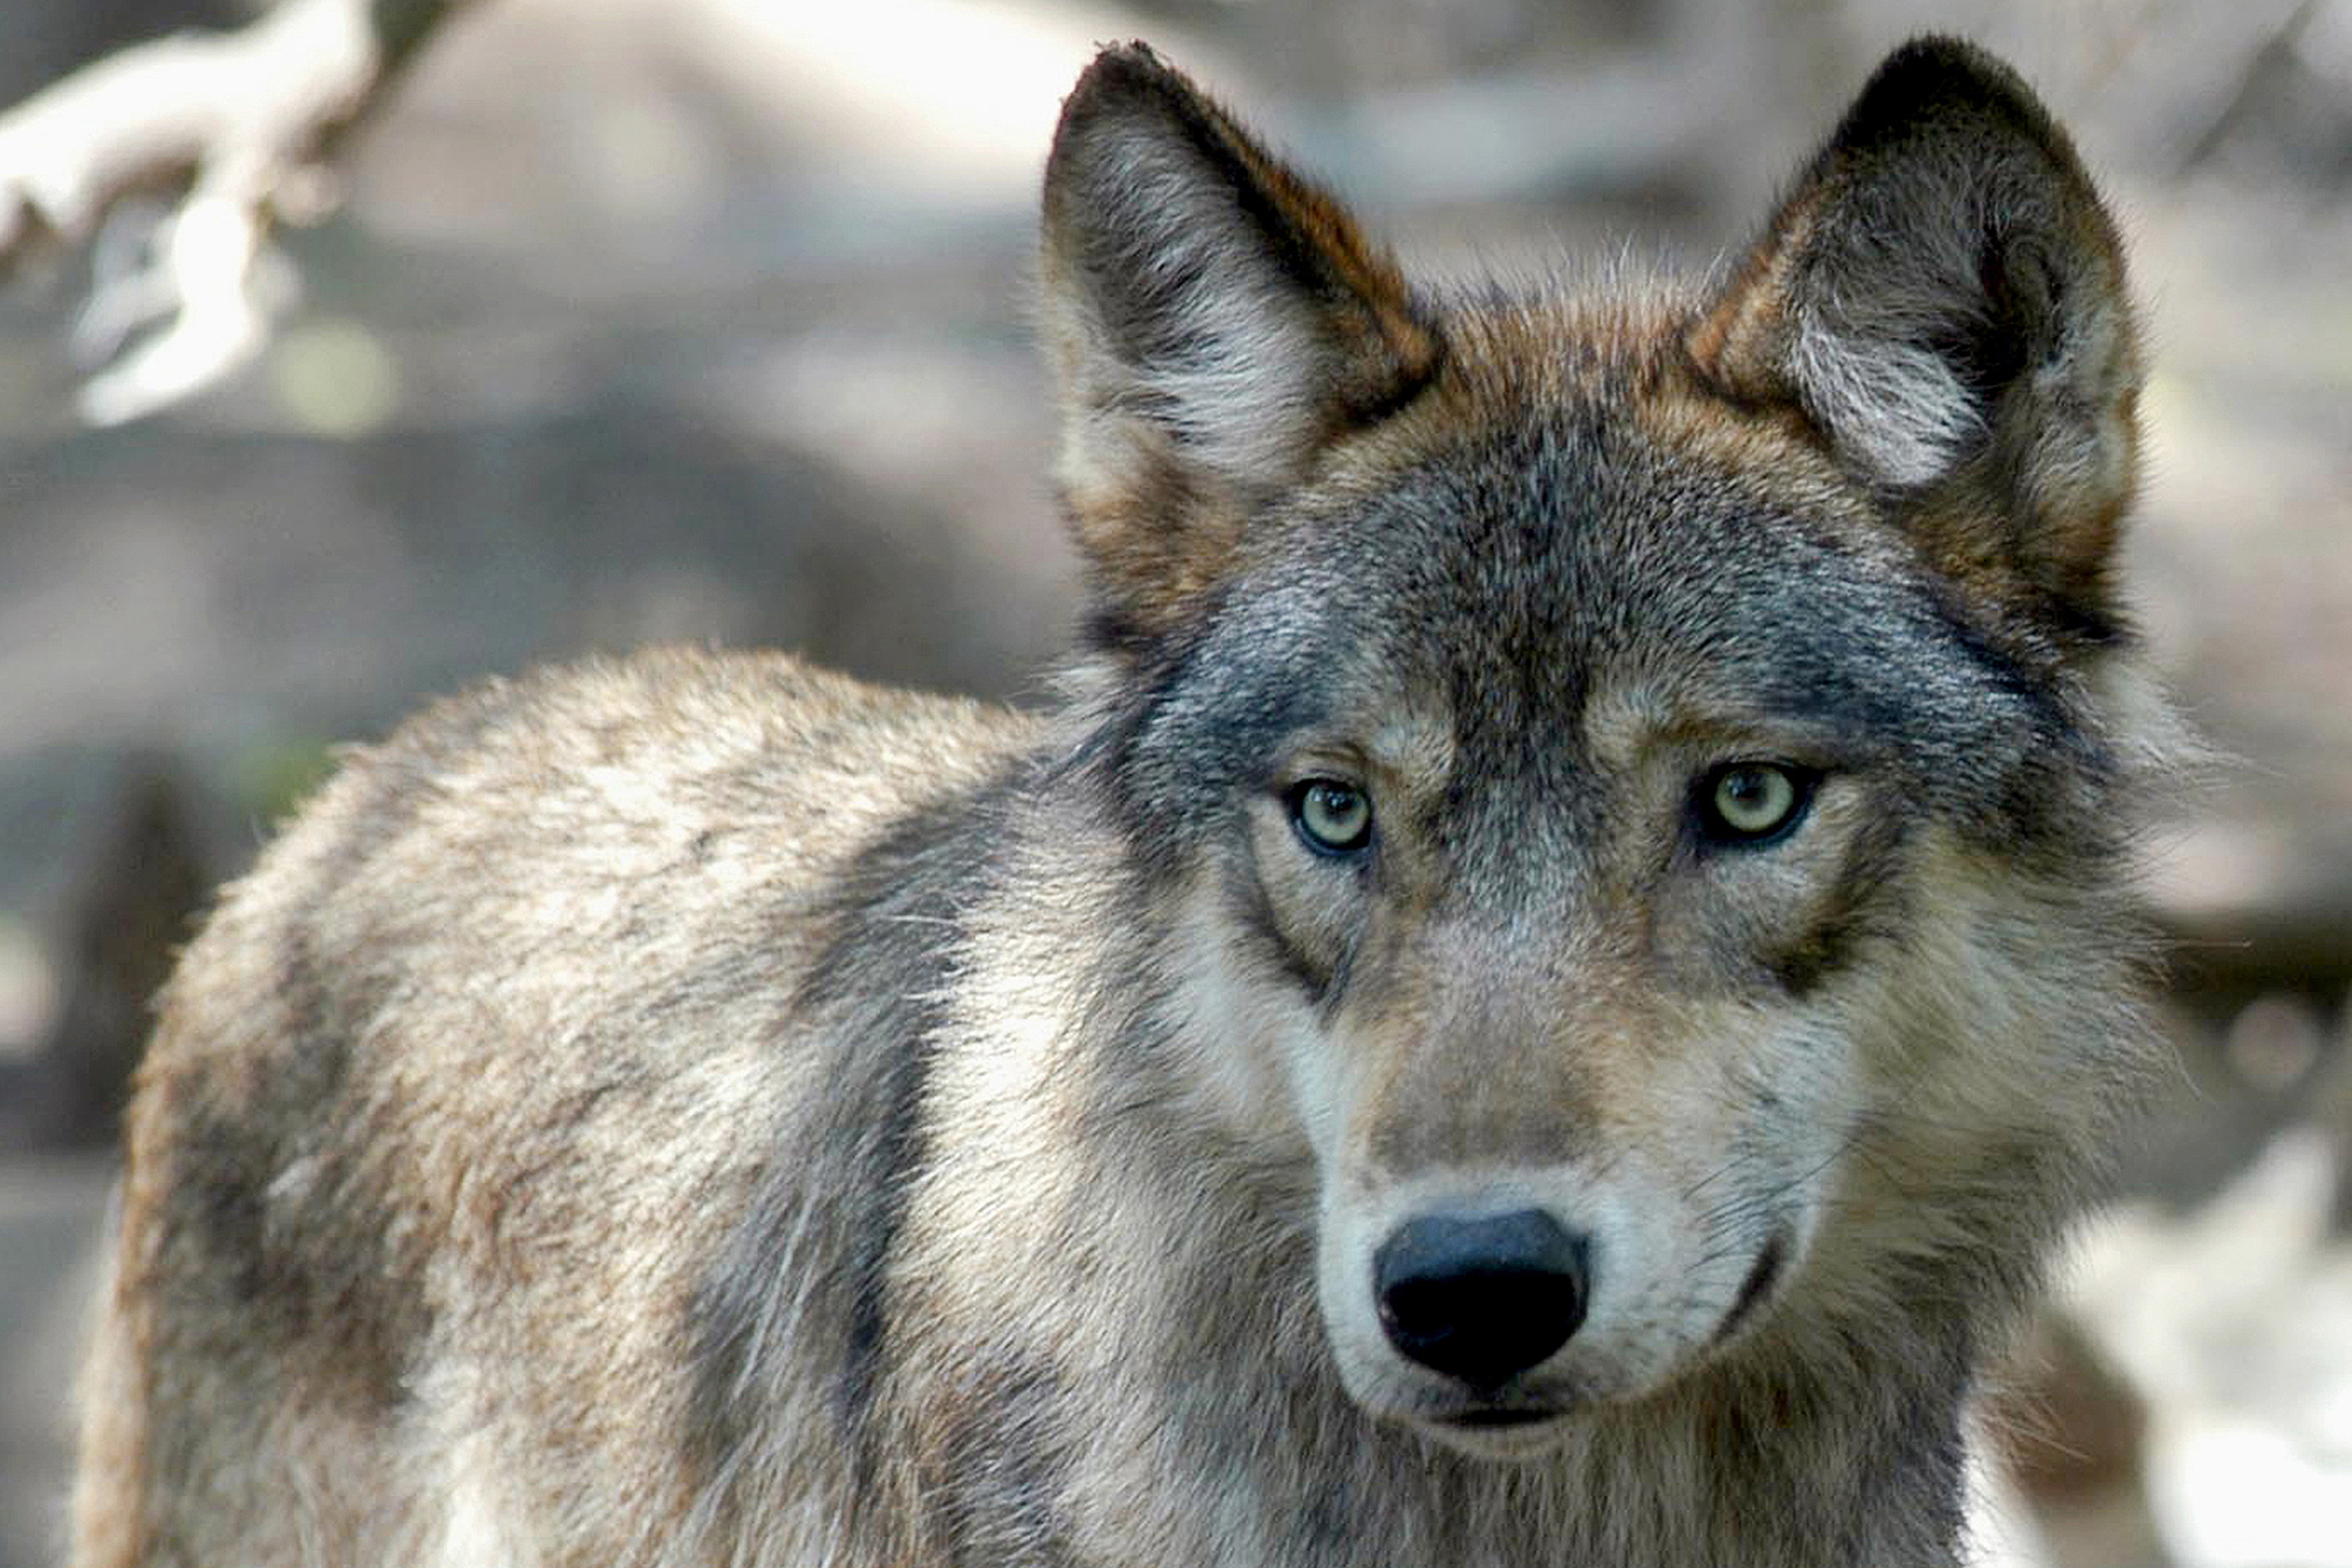 Lawsuit claims DNR ignored science and public comments when drafting state wolf plan